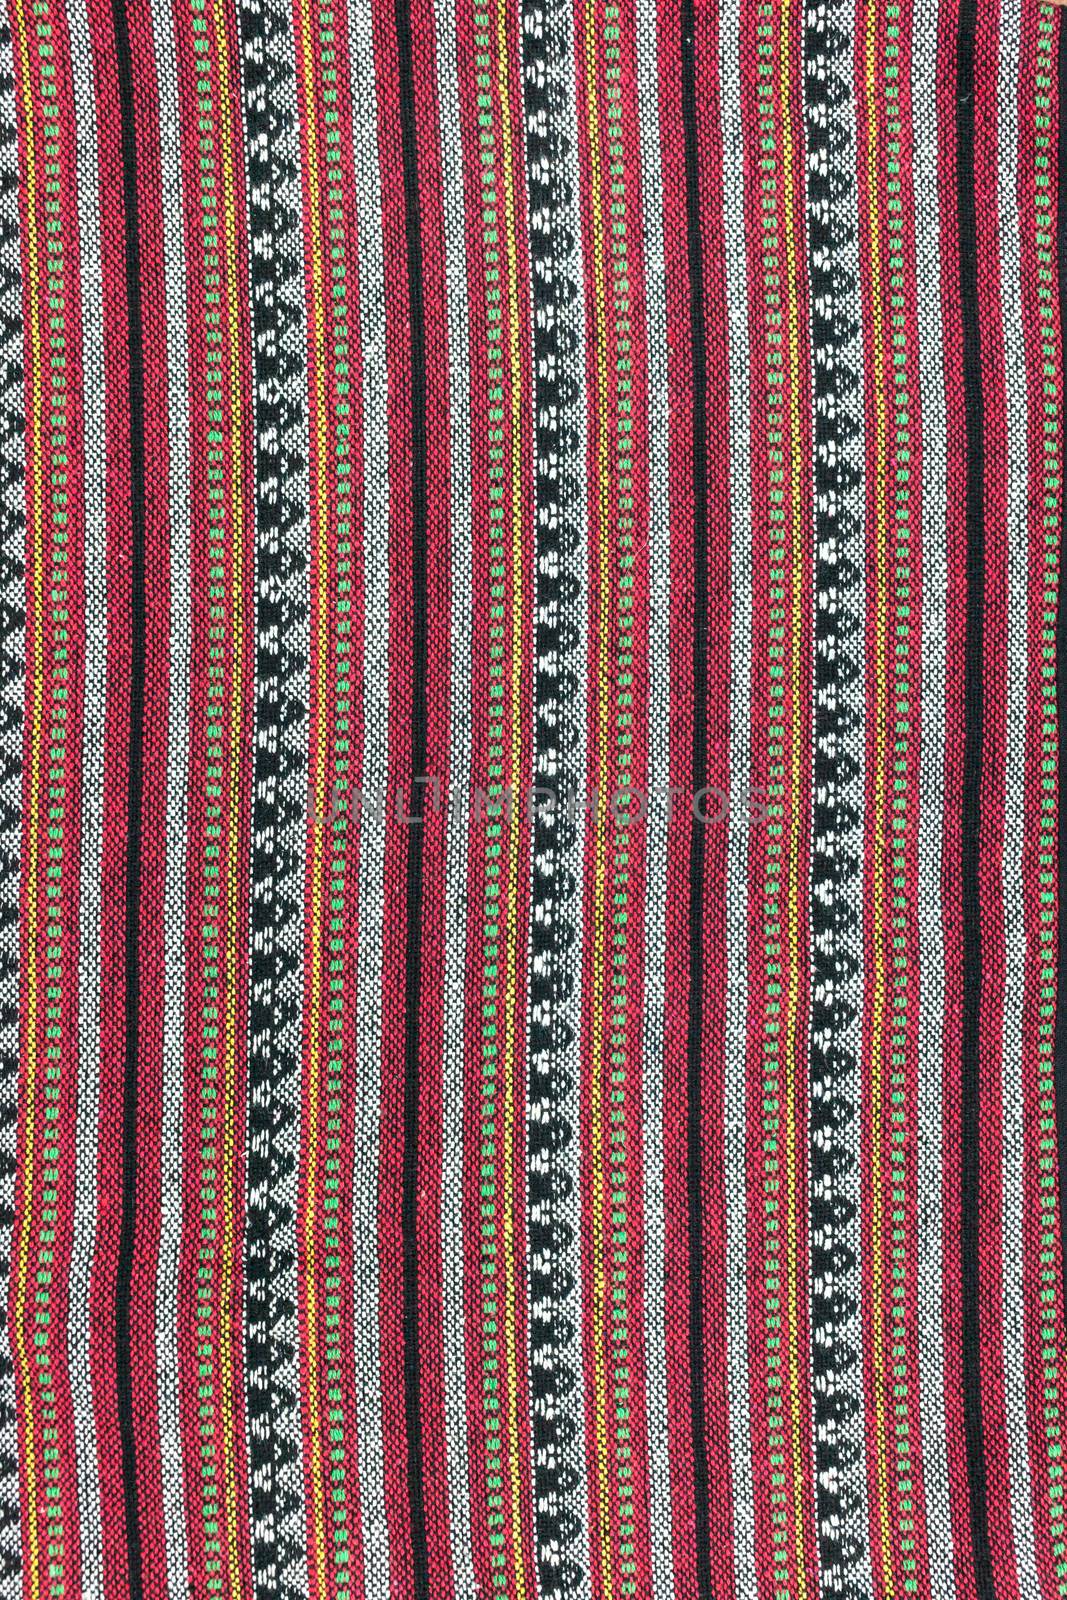 Local north Thailand pattern design made fabric and silk.